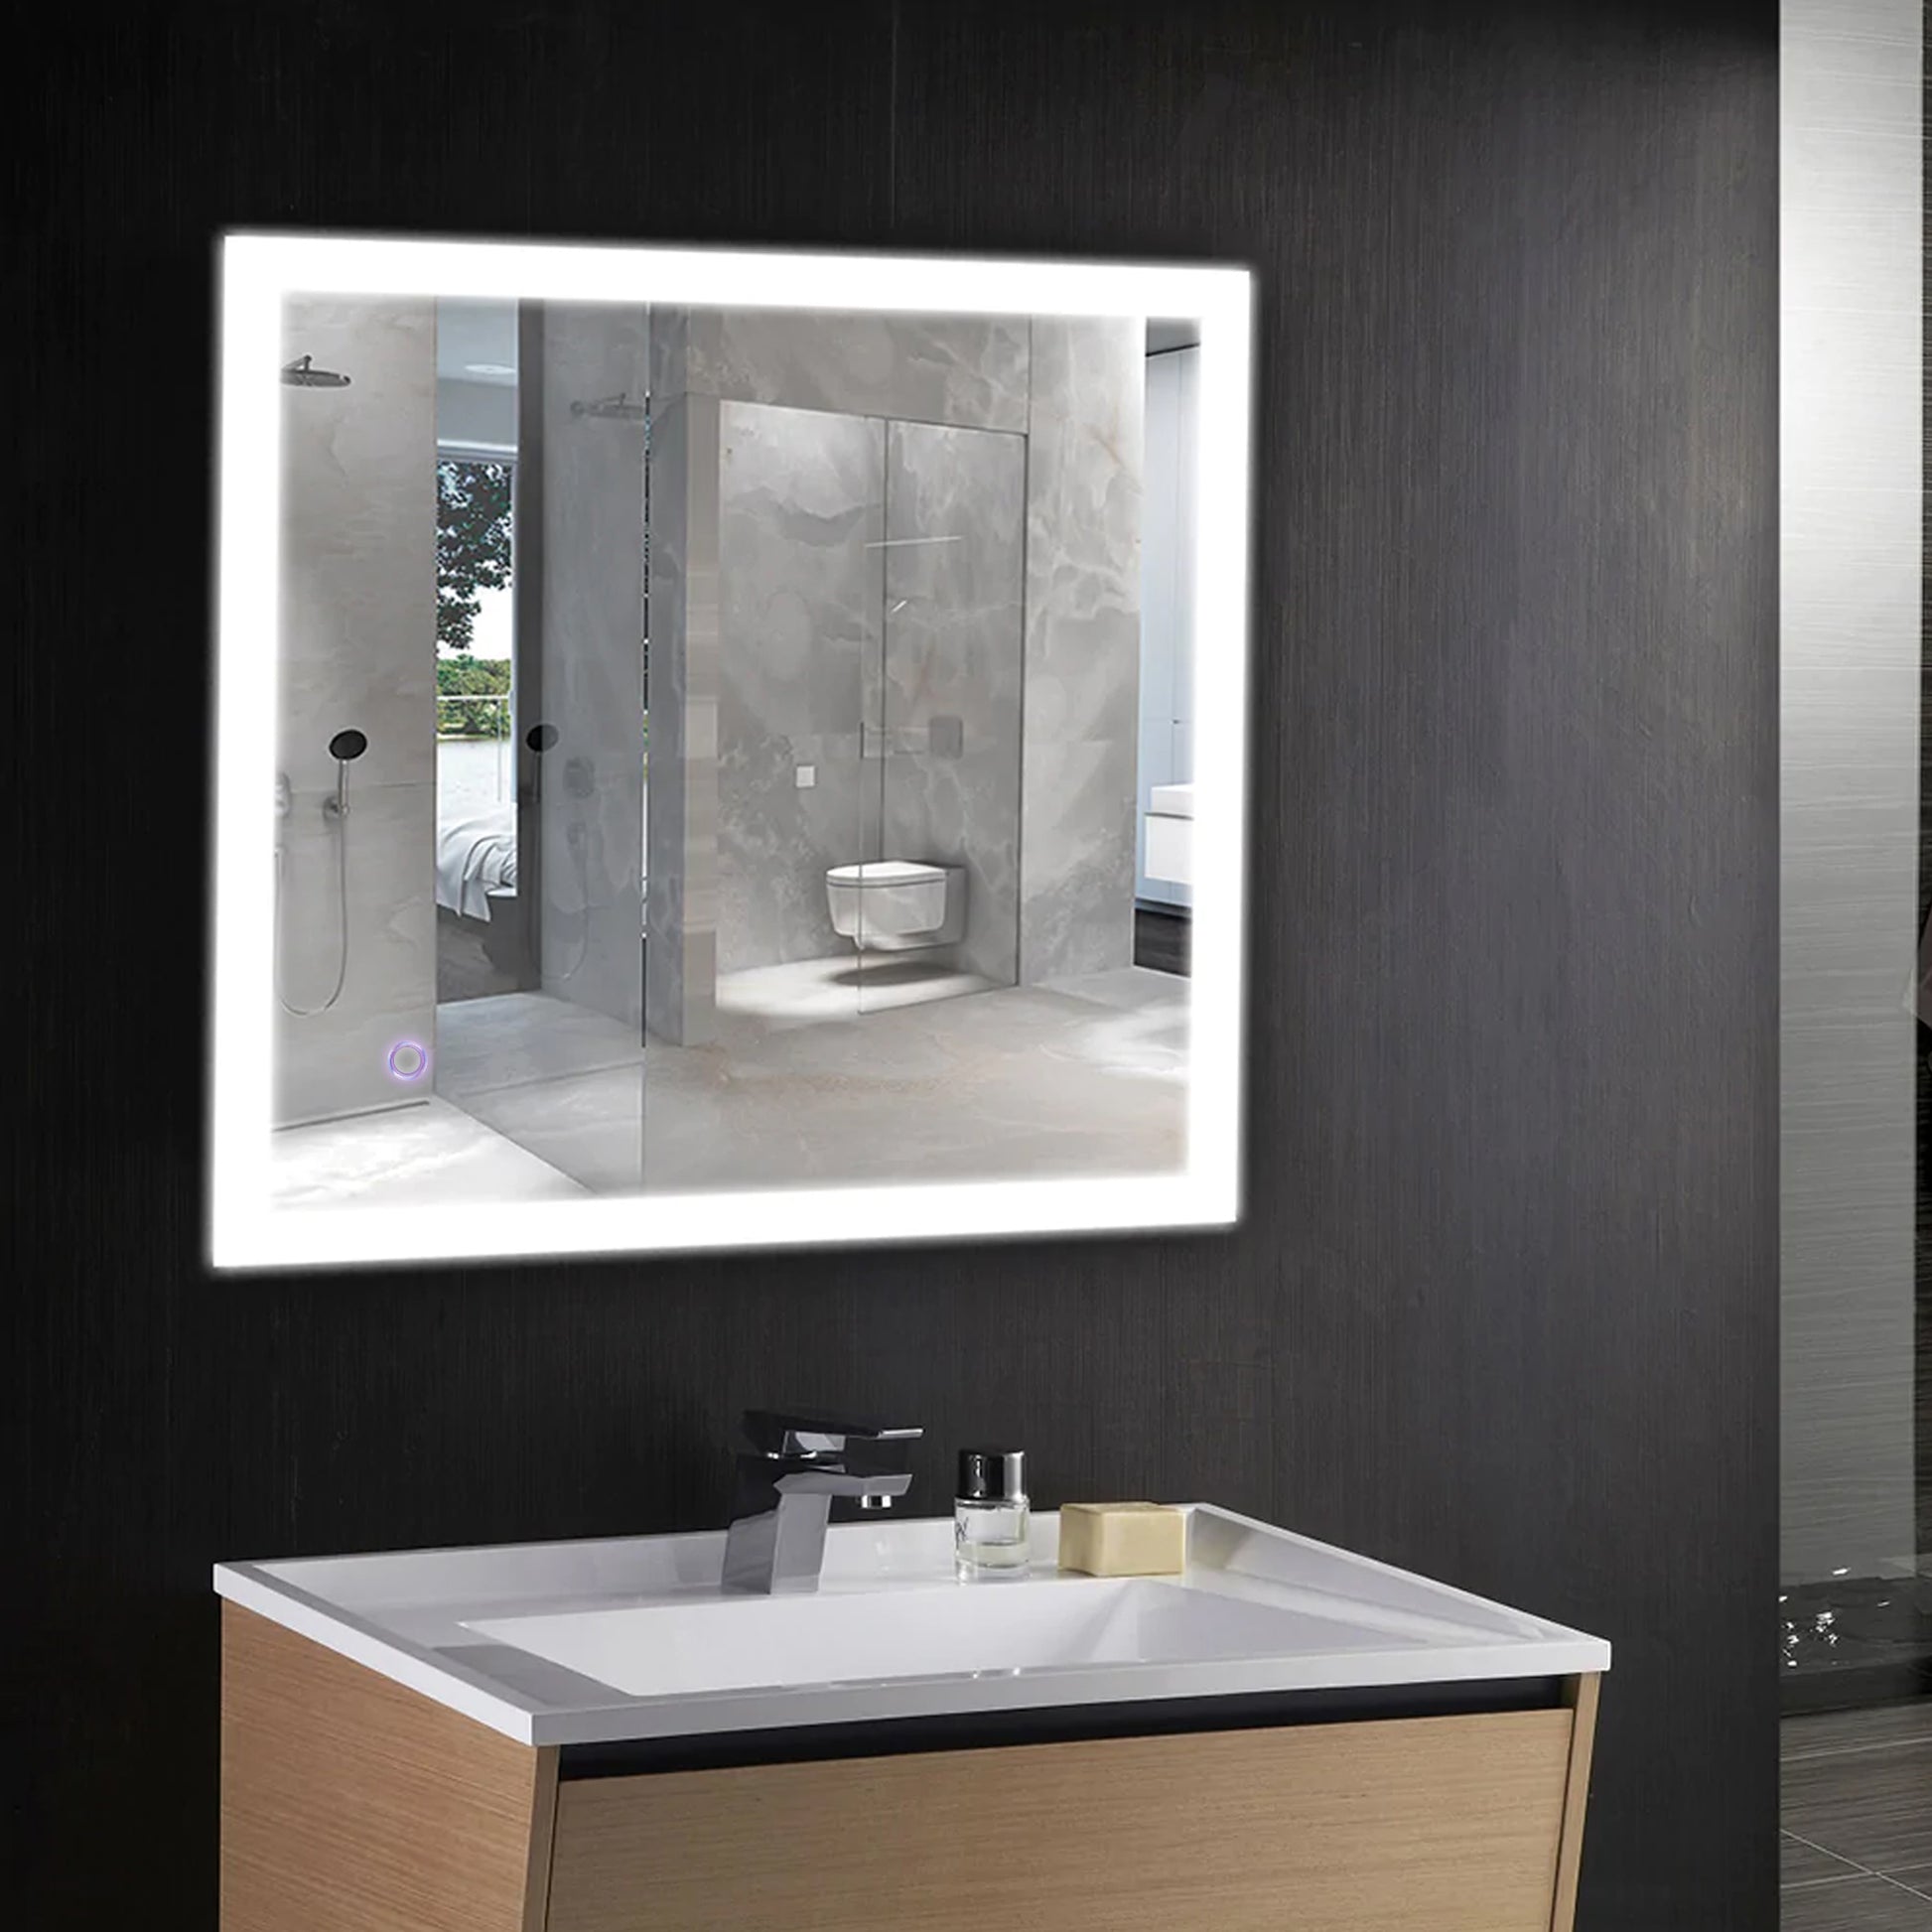 Are Bathroom LED Mirrors Good for Applying Makeup? – LEDMyPlace